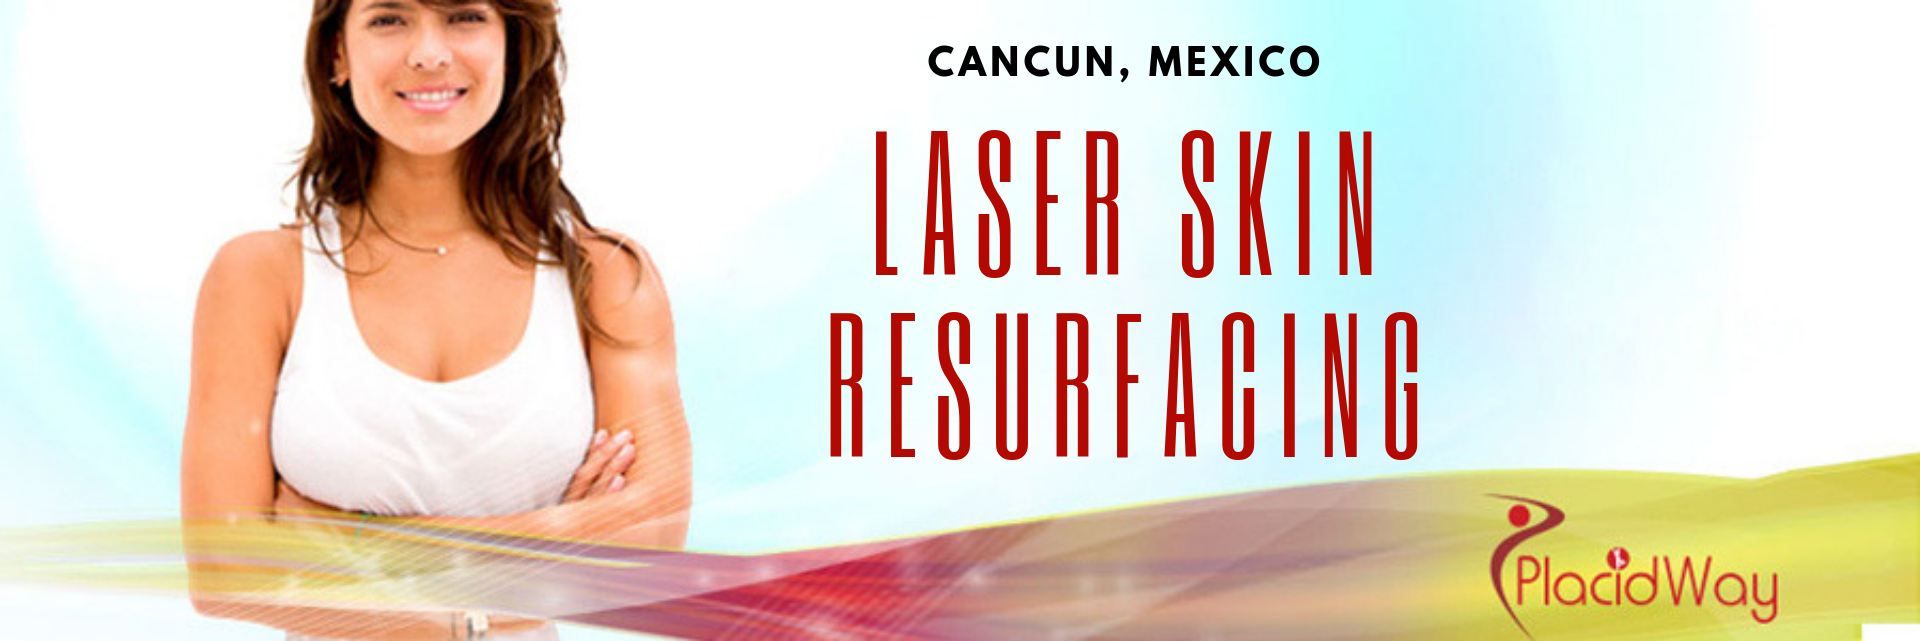 CO2 Laser Skin Resurfacing Cost in Cancun, Mexico